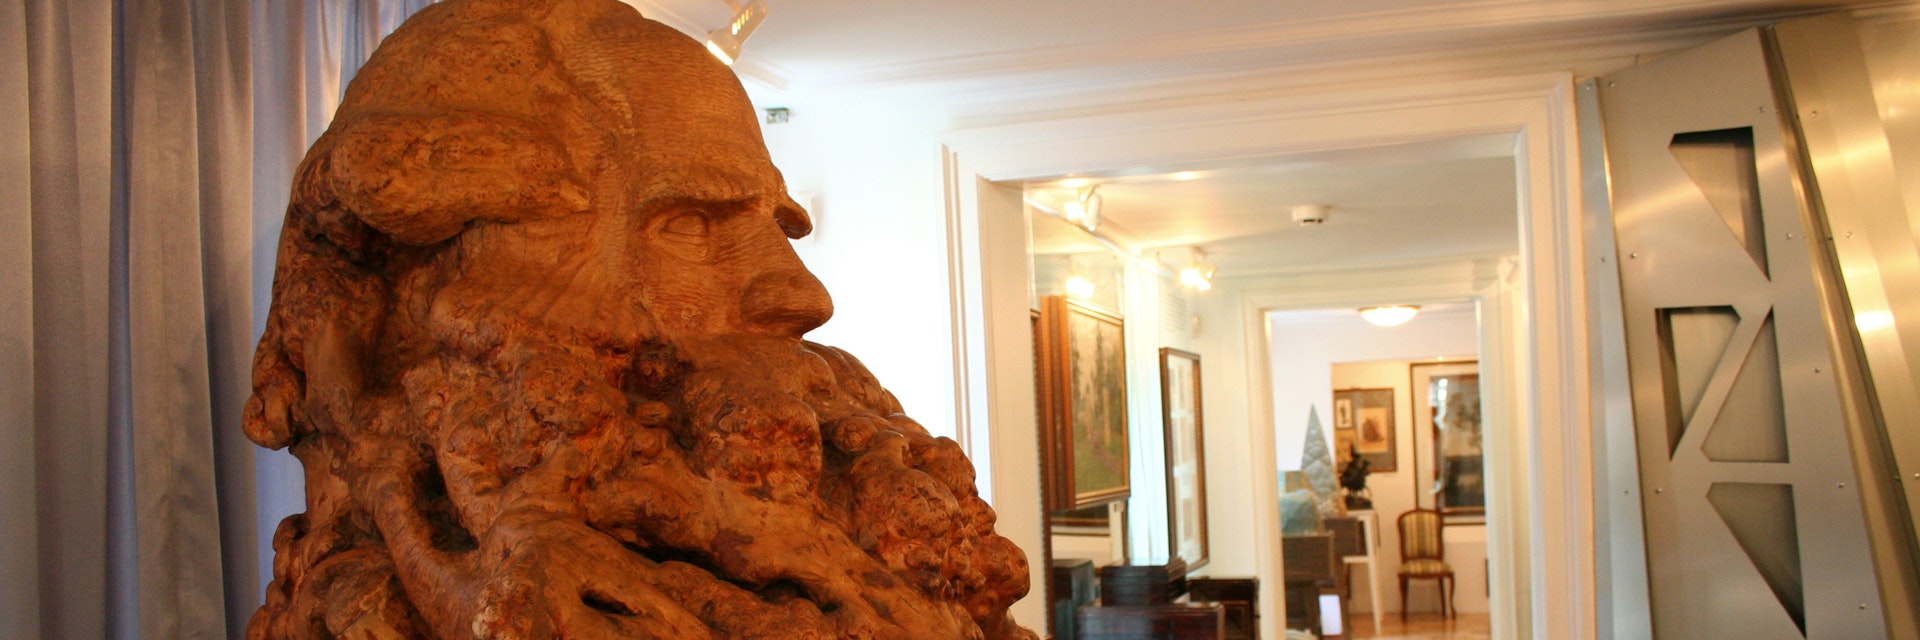 Bust of Tolstoy in Tolstoy Literary Museum.